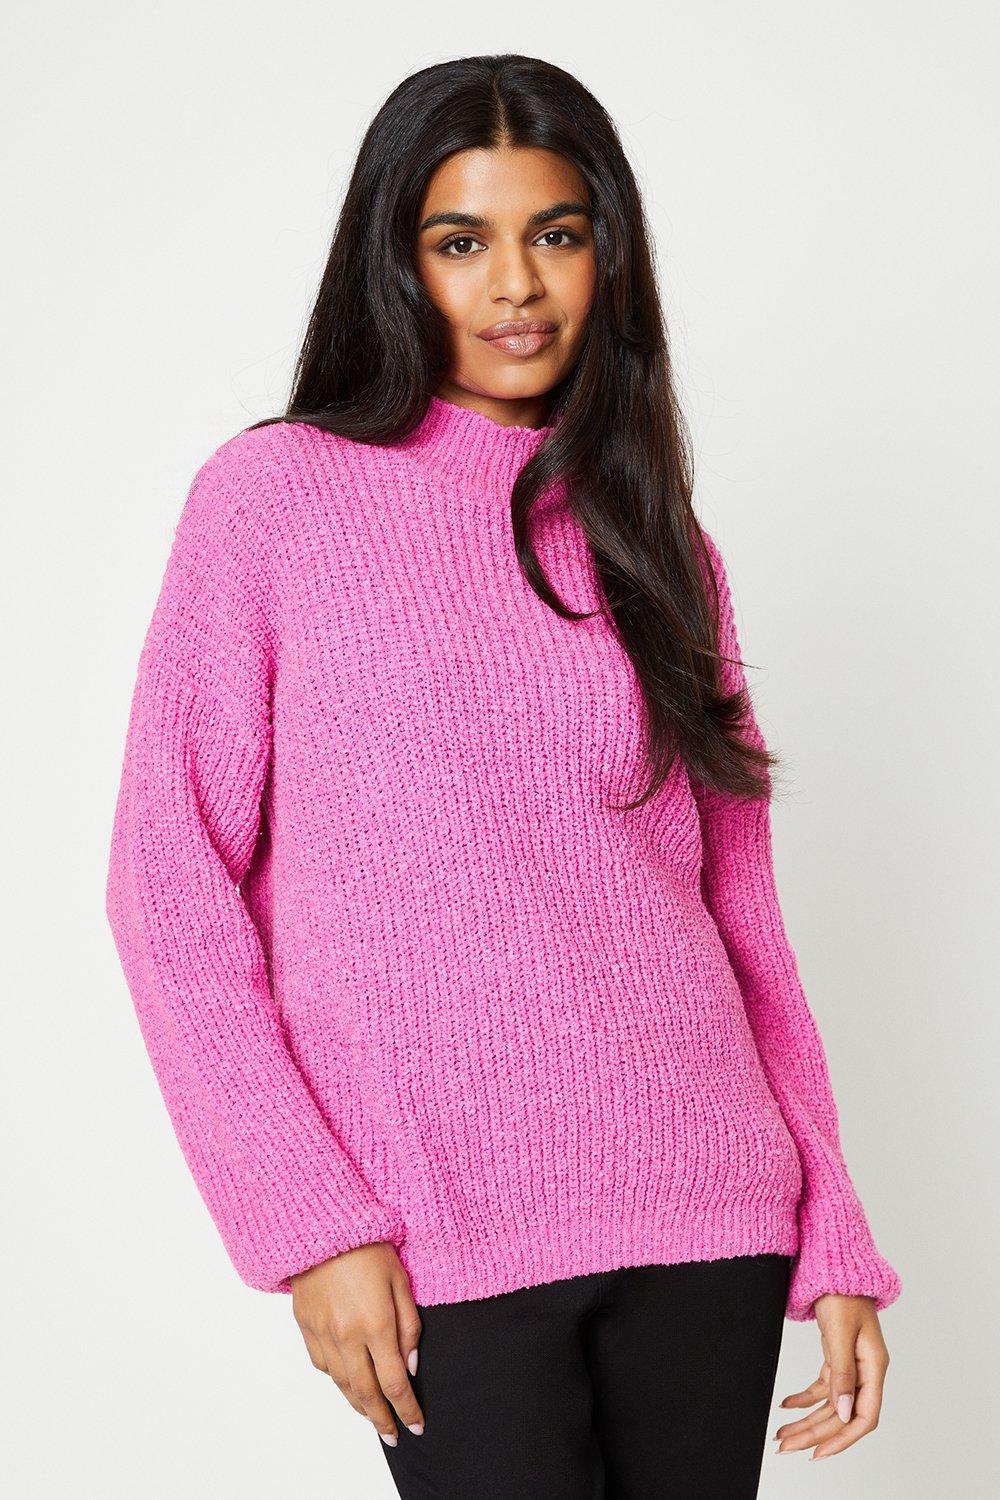 Women’s Petite Boucle Slouchy High Neck Jumper - pink - L